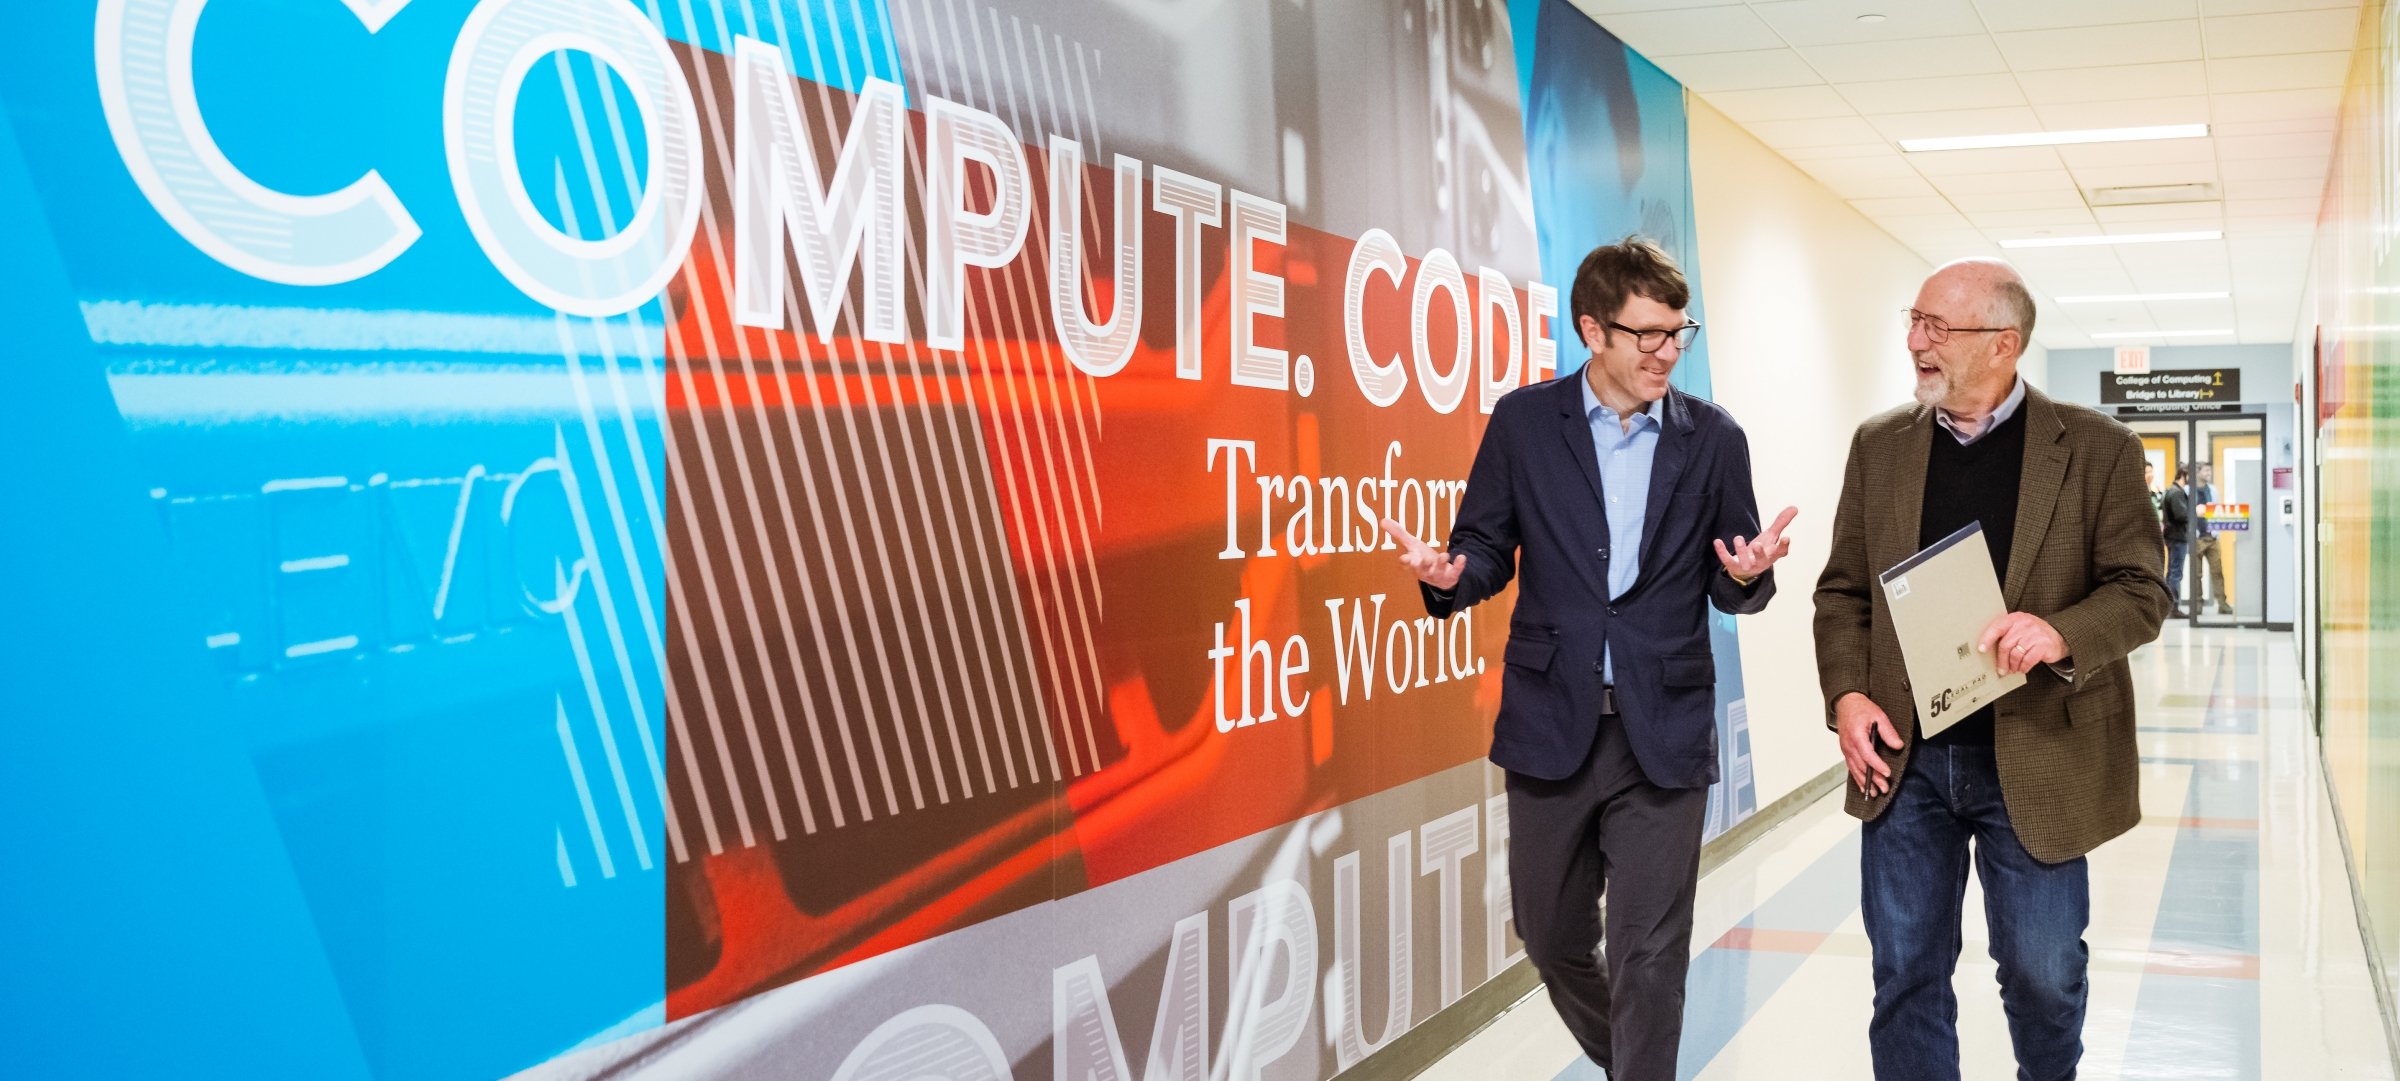 Two people walking down a hall with the words Compute Code Transform the World written on the wall